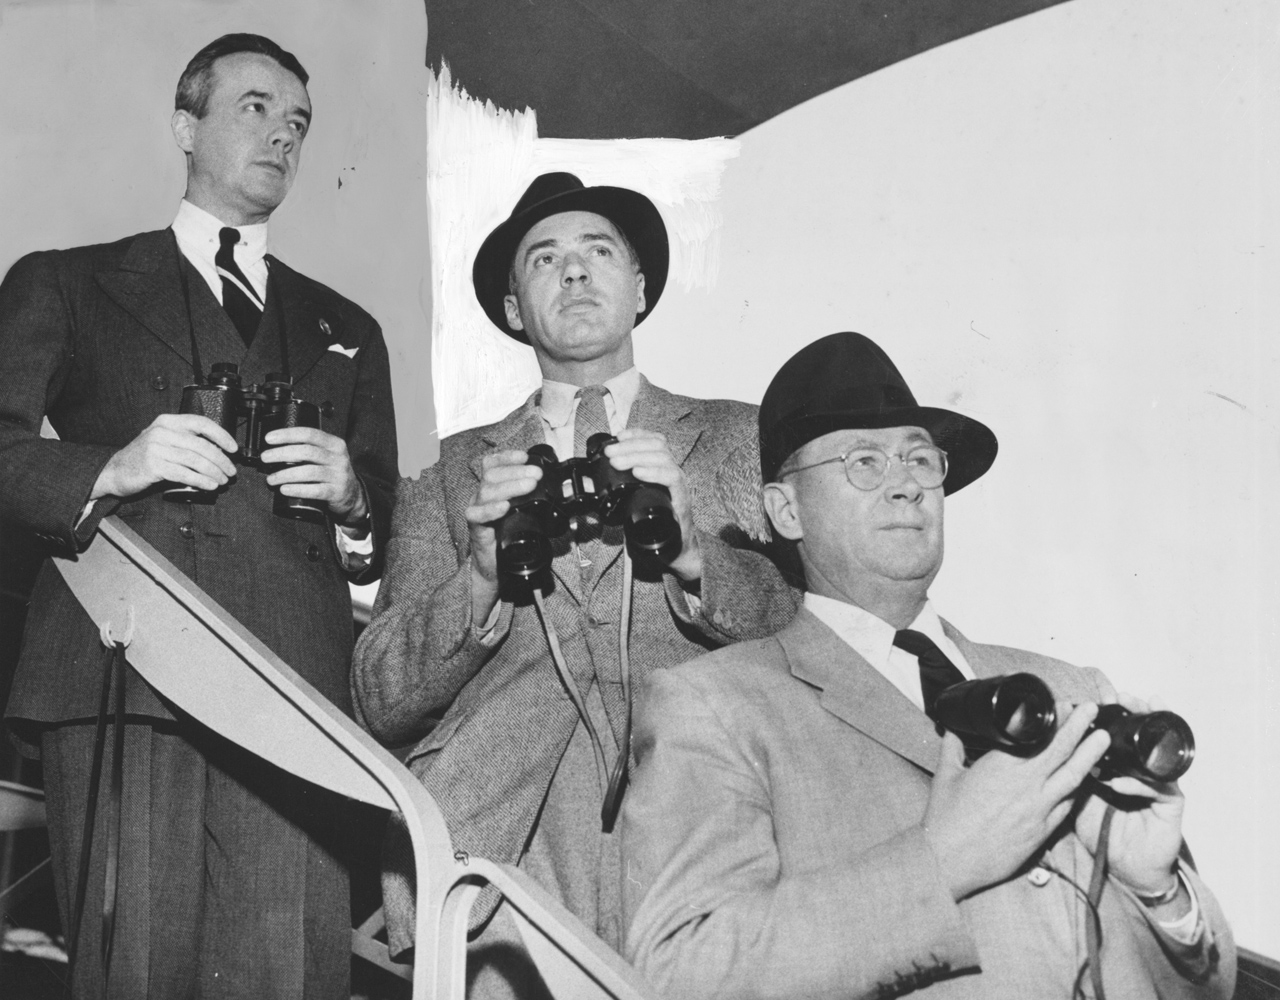 Frank E. Kilroe as assistant racing secretary and placing judge with Aiden Roark and Jeff Cravath at Santa Anita Park (Keeneland Library Thoroughbred Times Collection)